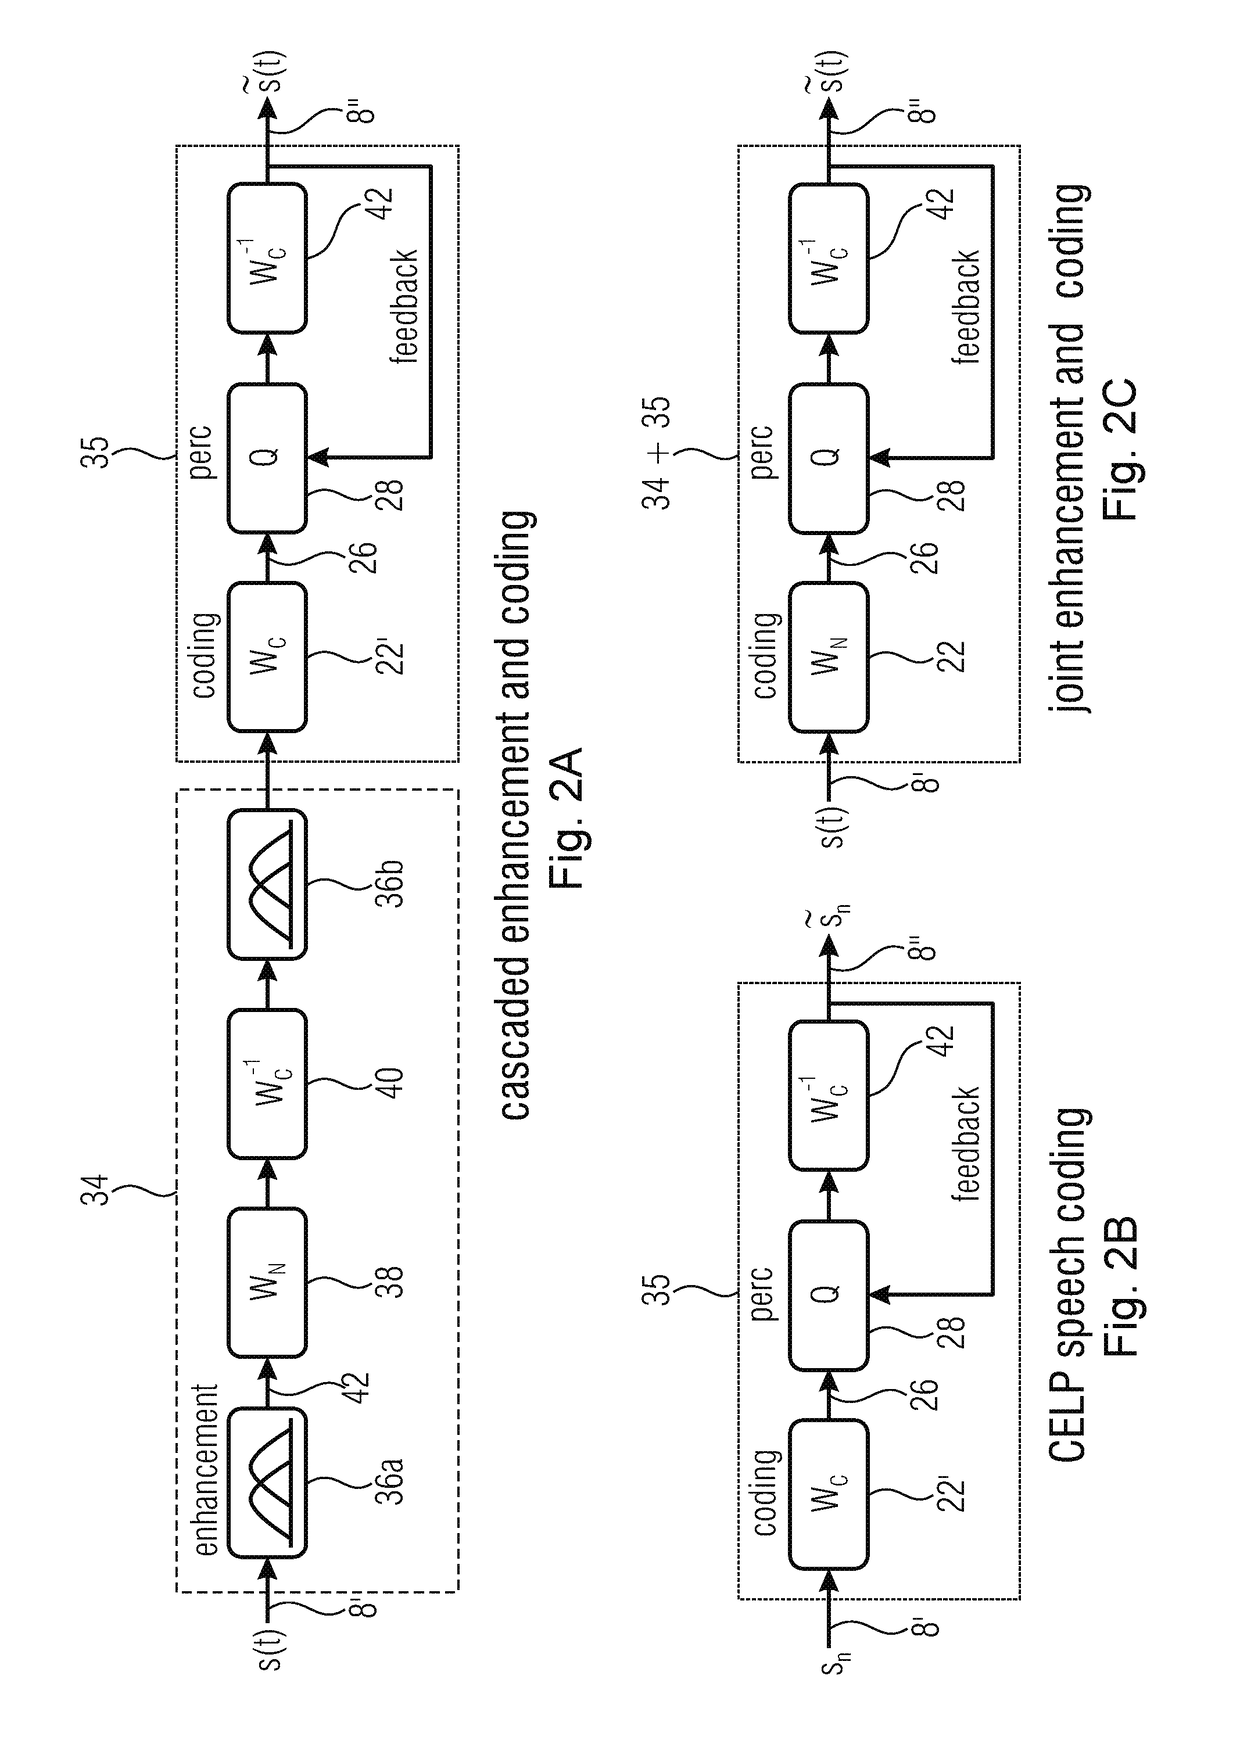 Encoder and method for encoding an audio signal with reduced background noise using linear predictive coding